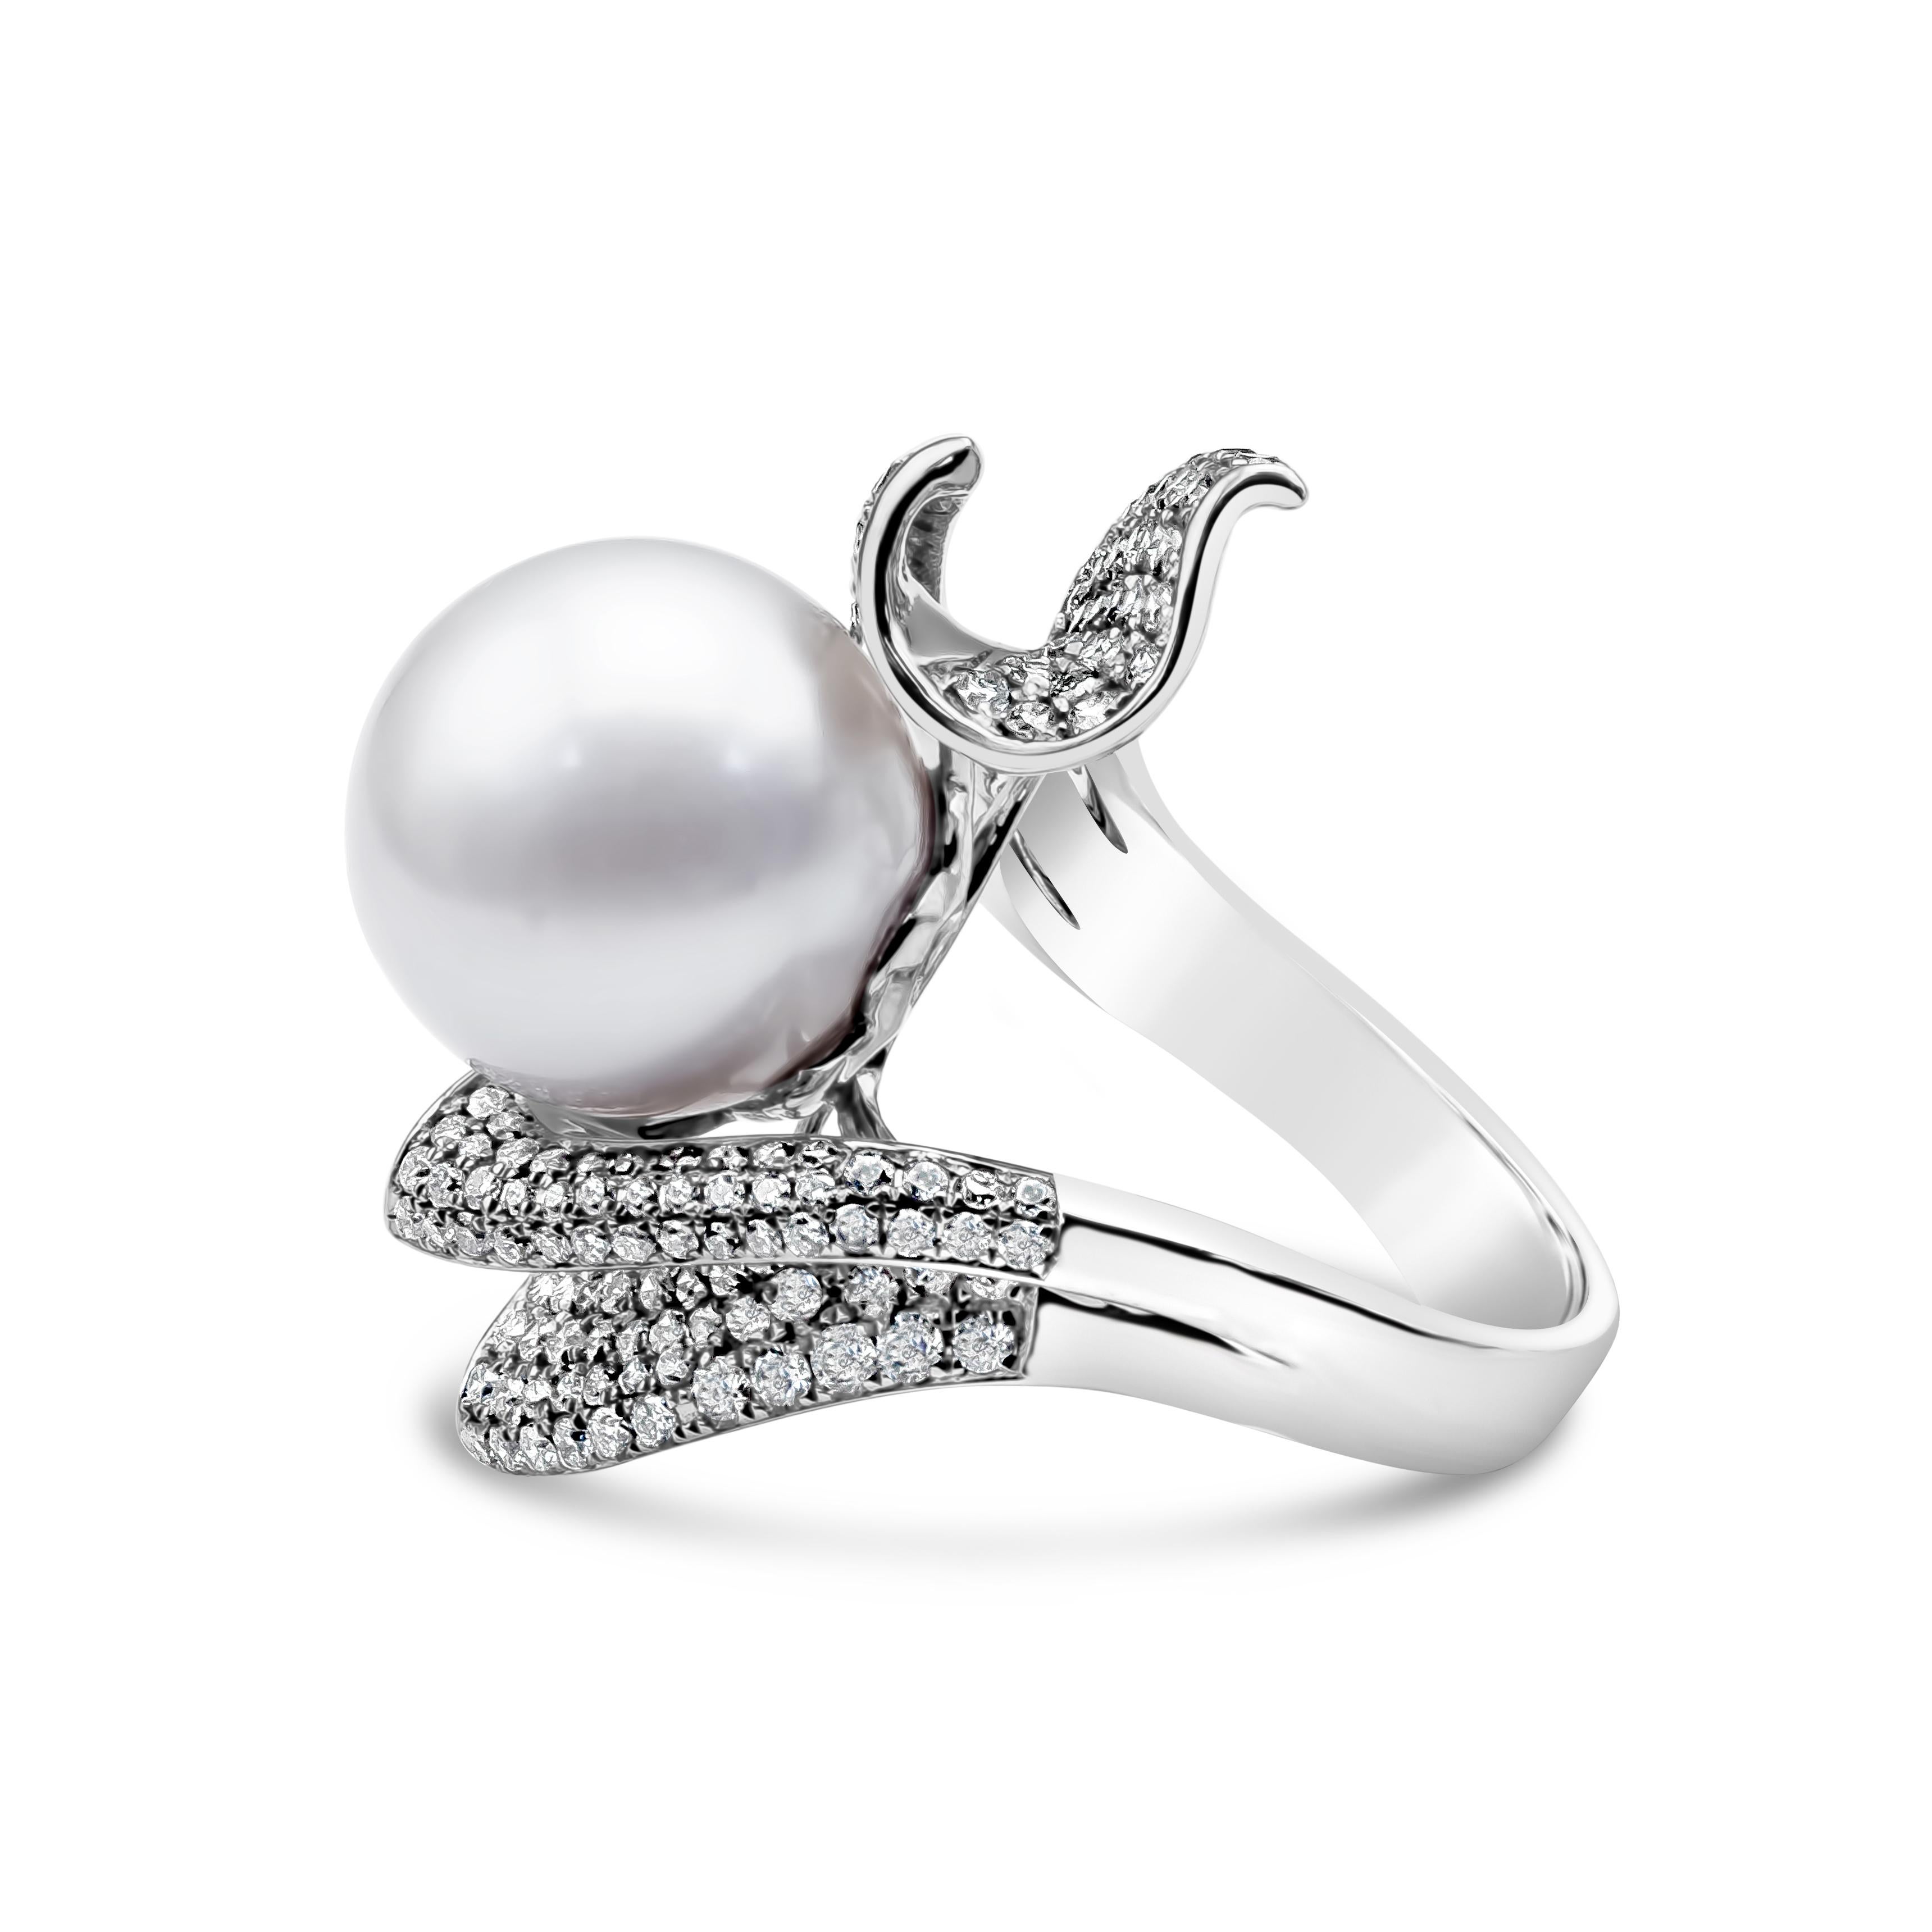 A beautiful and intricately designed cocktail ring showcasing a South Sea pearl accented with 190 round cut diamonds weighing 1.44 carats total. Pearl are approximately 13-14 mm diameter. Set in 18K White Gold setting. Size 6.75 US. Length of the